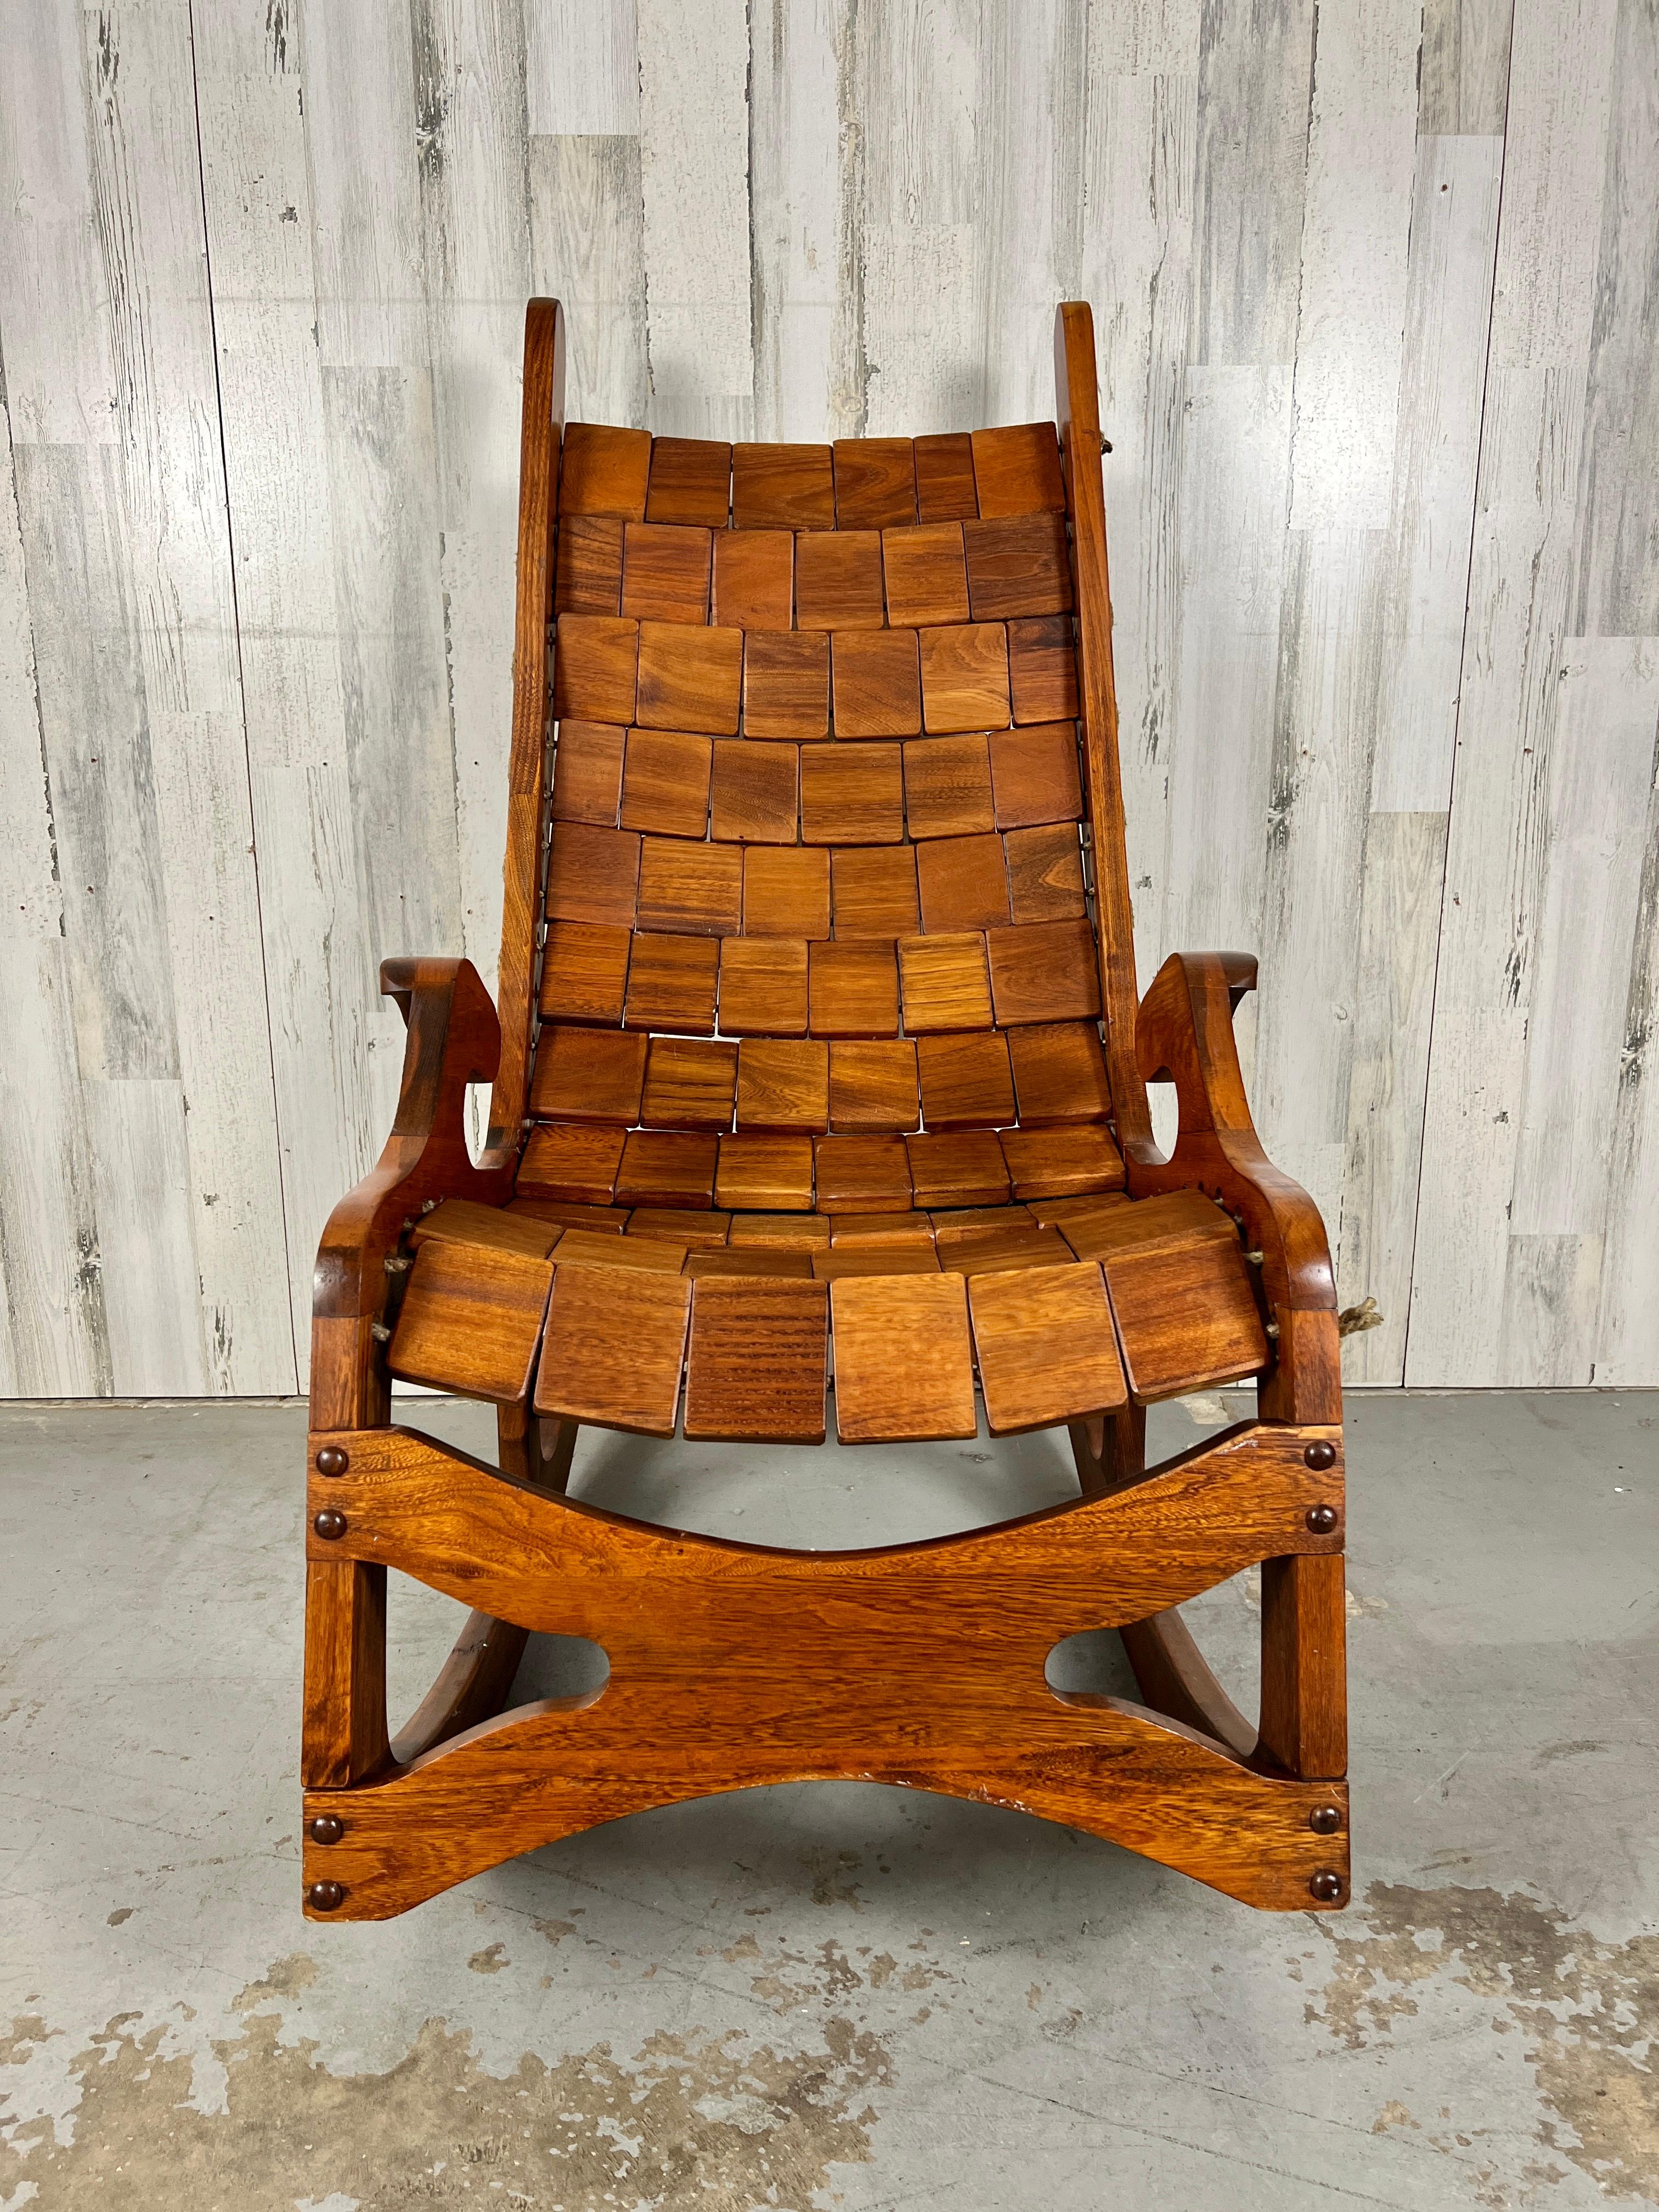 Let the rest of the world go by rocker by Top Notch Industries. Hand crafted patchwork walnut strung together with rope. Very comfortable and stunning for any room of the house.